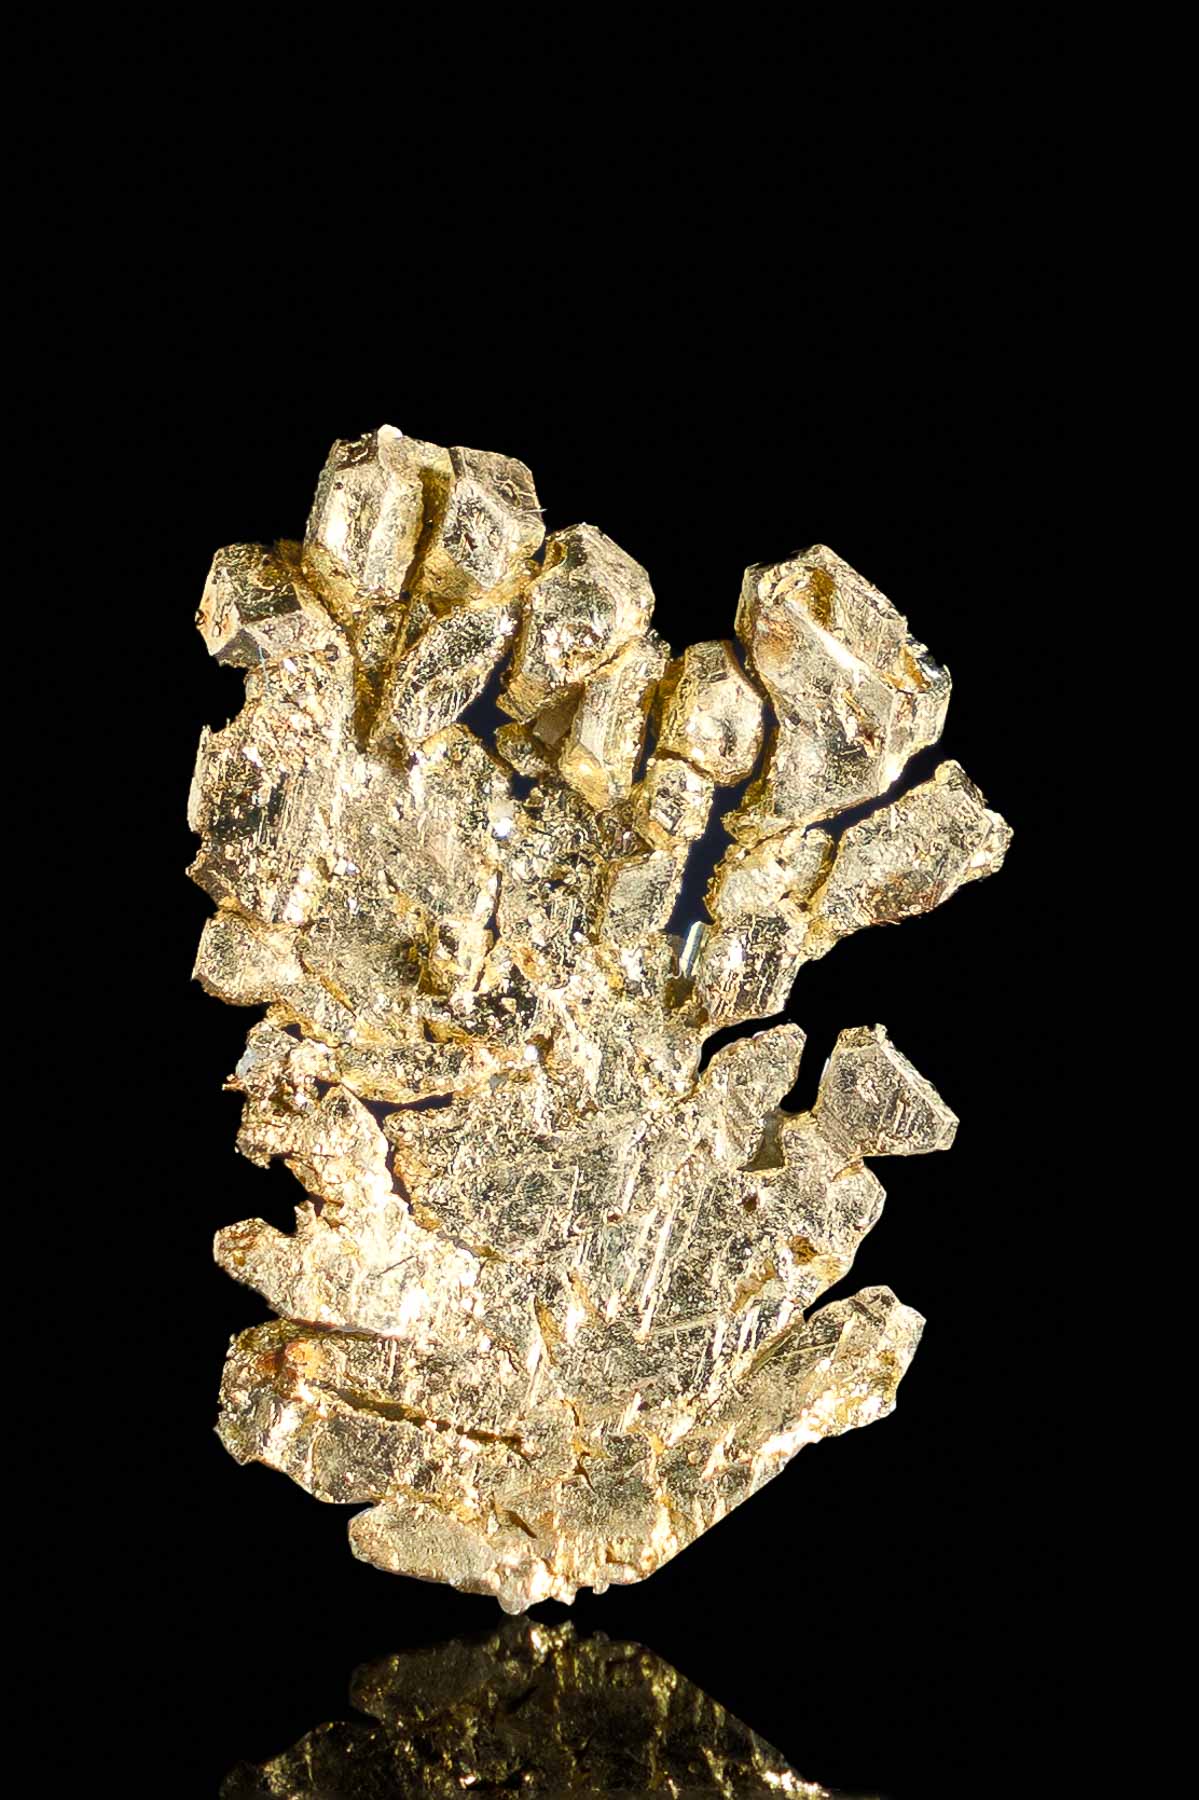 Brilliant Electrum Gold from Round Mountain - 1.18 grams